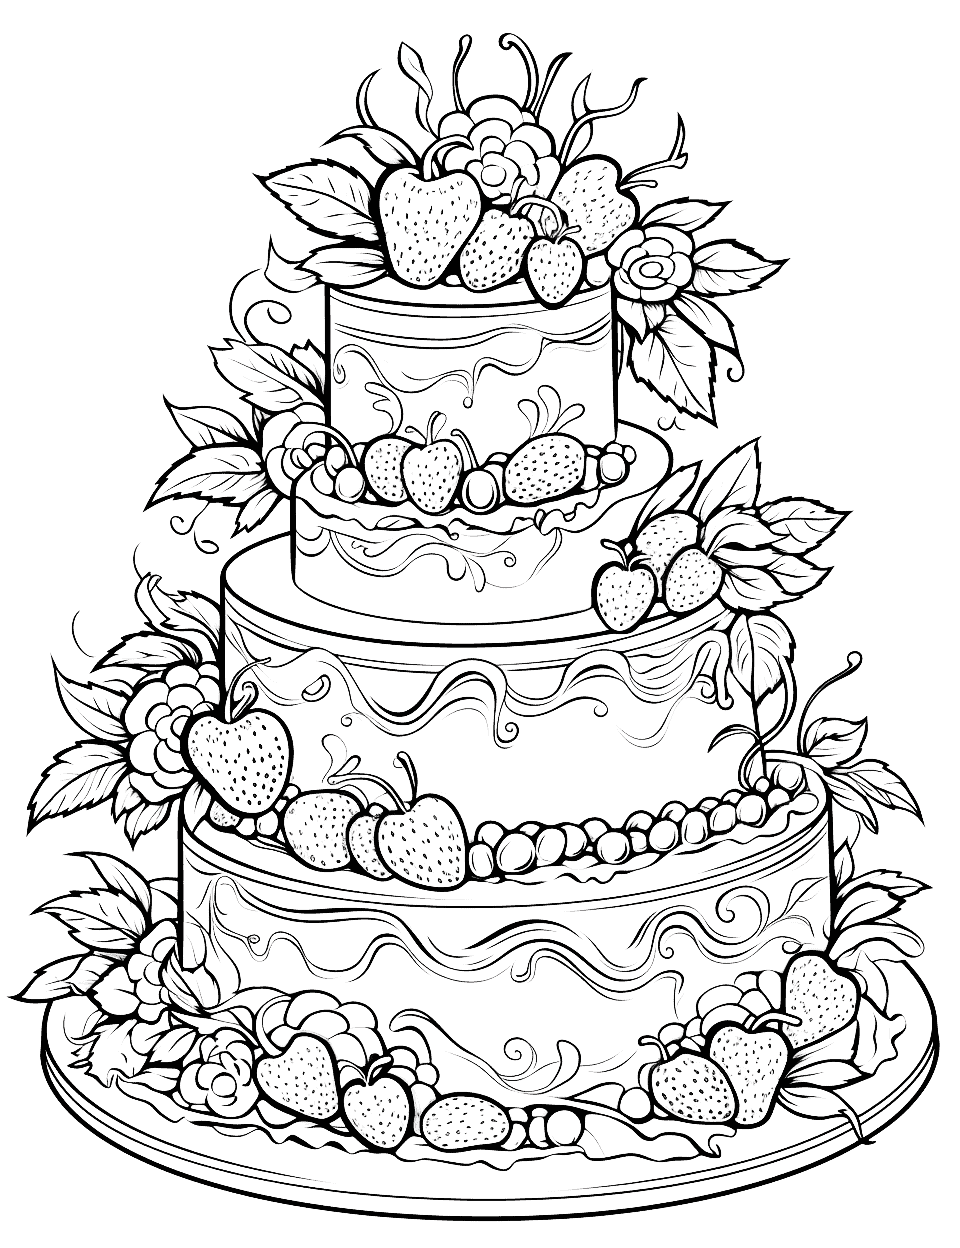 Decadent Delight Adult Coloring Page - A beautifully decorated three-tier cake.